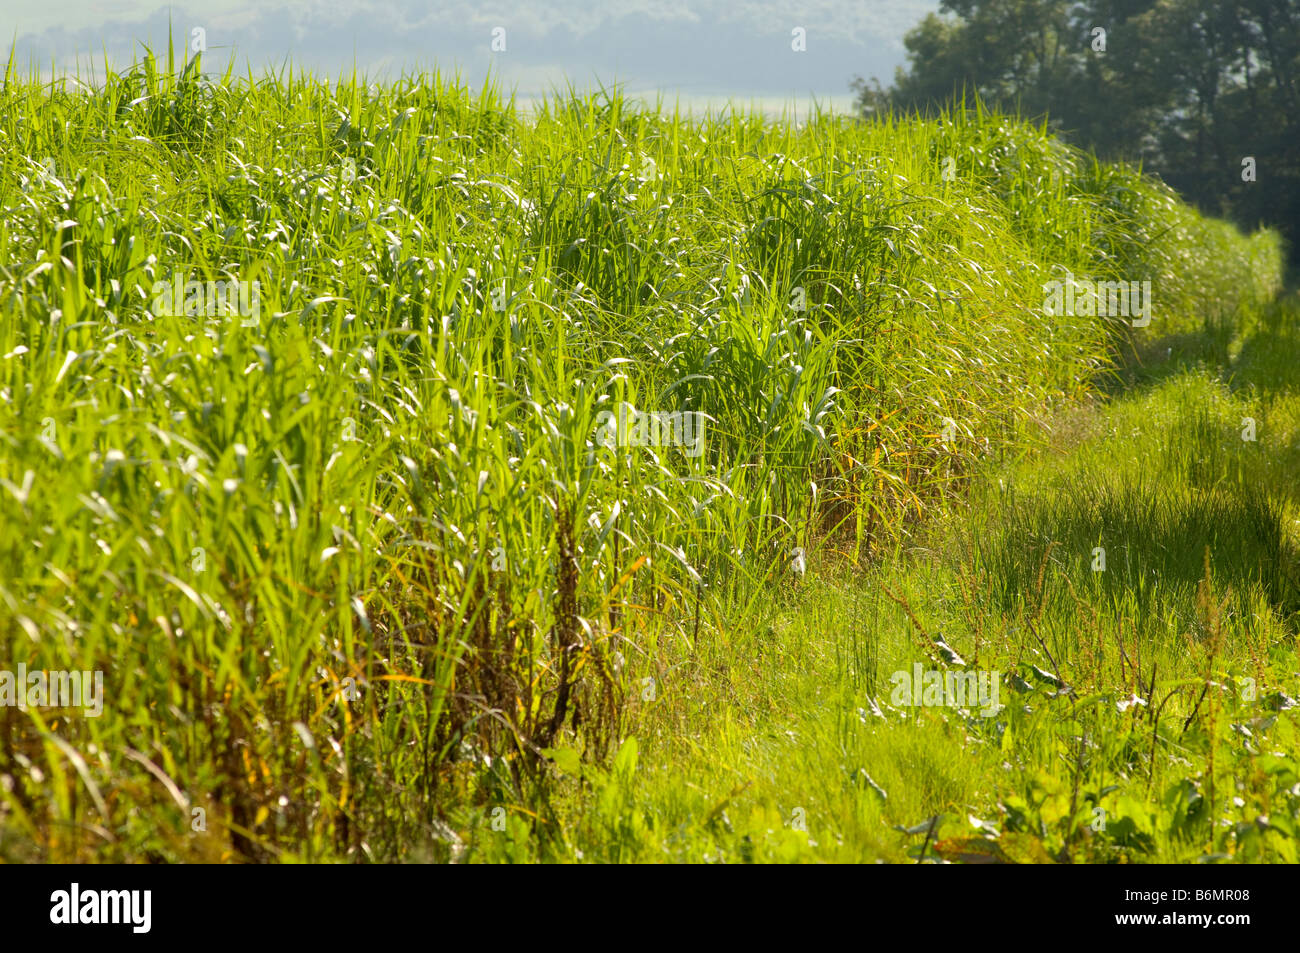 Field of growing miscanthus grass, grown for biofuel production Stock Photo